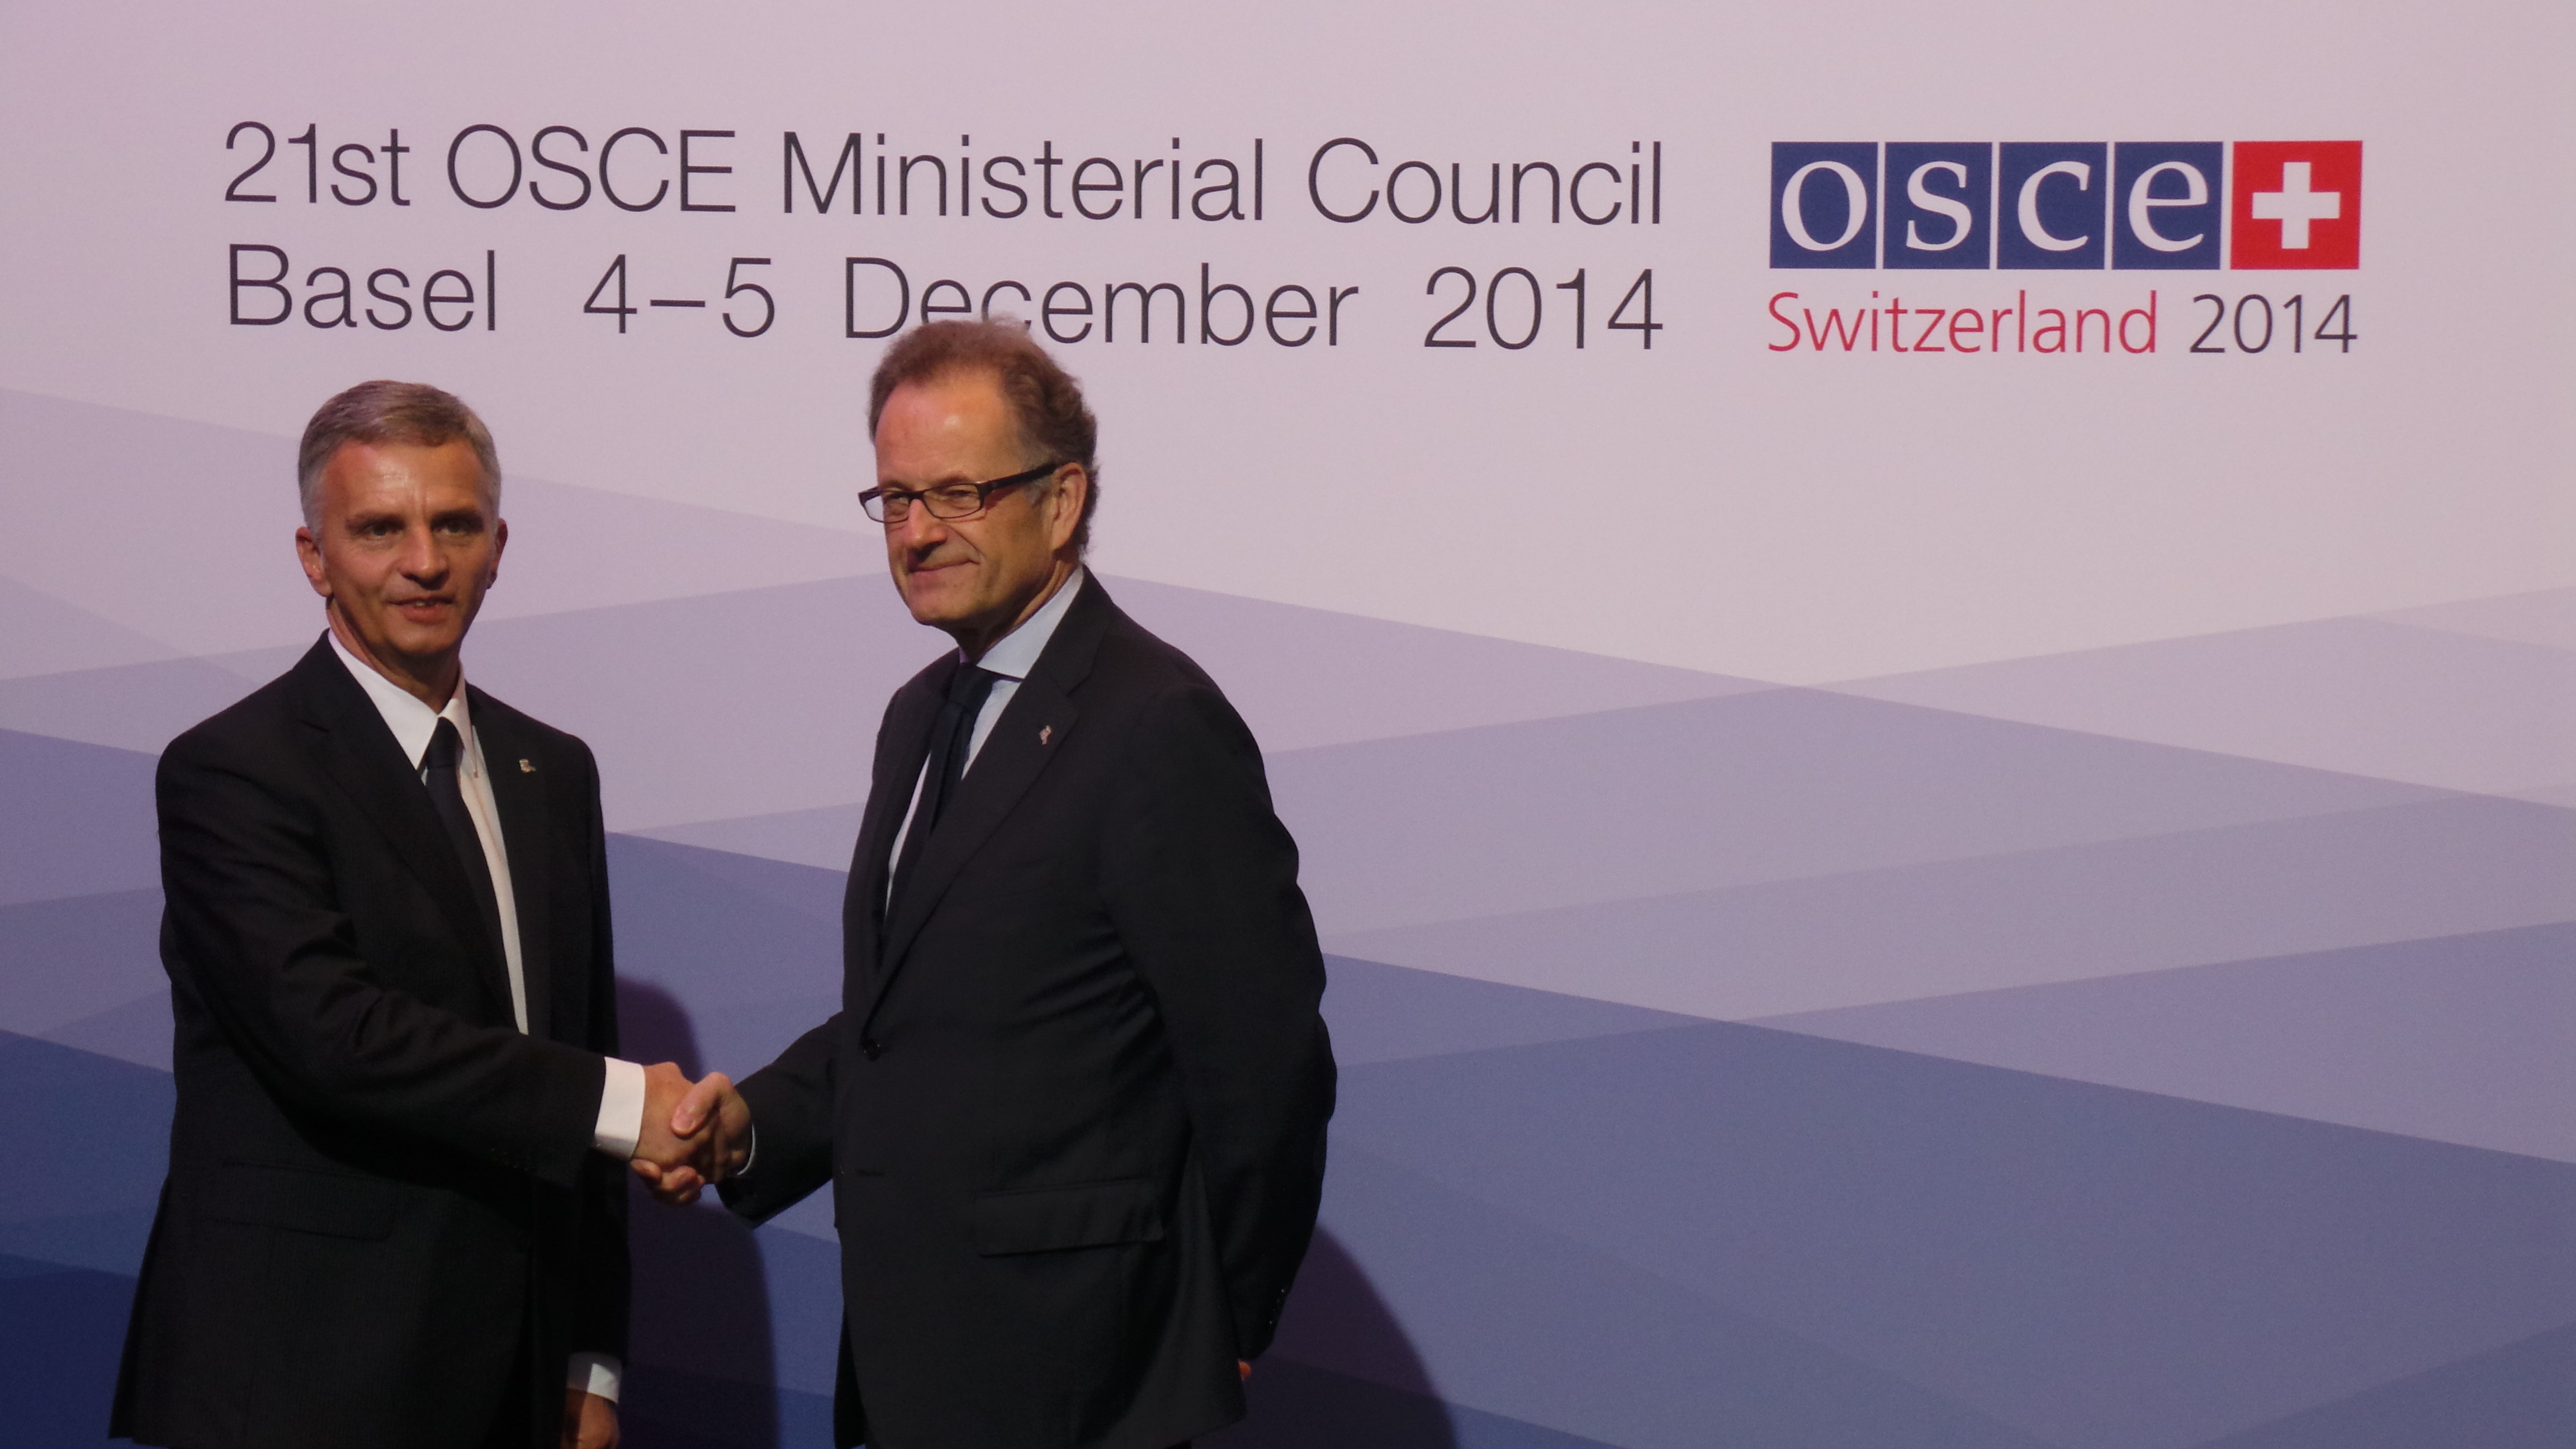 The President of the Swiss Confederation, Didier Burkhalter, greets Michael Møller, Acting Director-General at the United Nations office at Geneva at the OSCE Ministerial Council 2014 in Basel